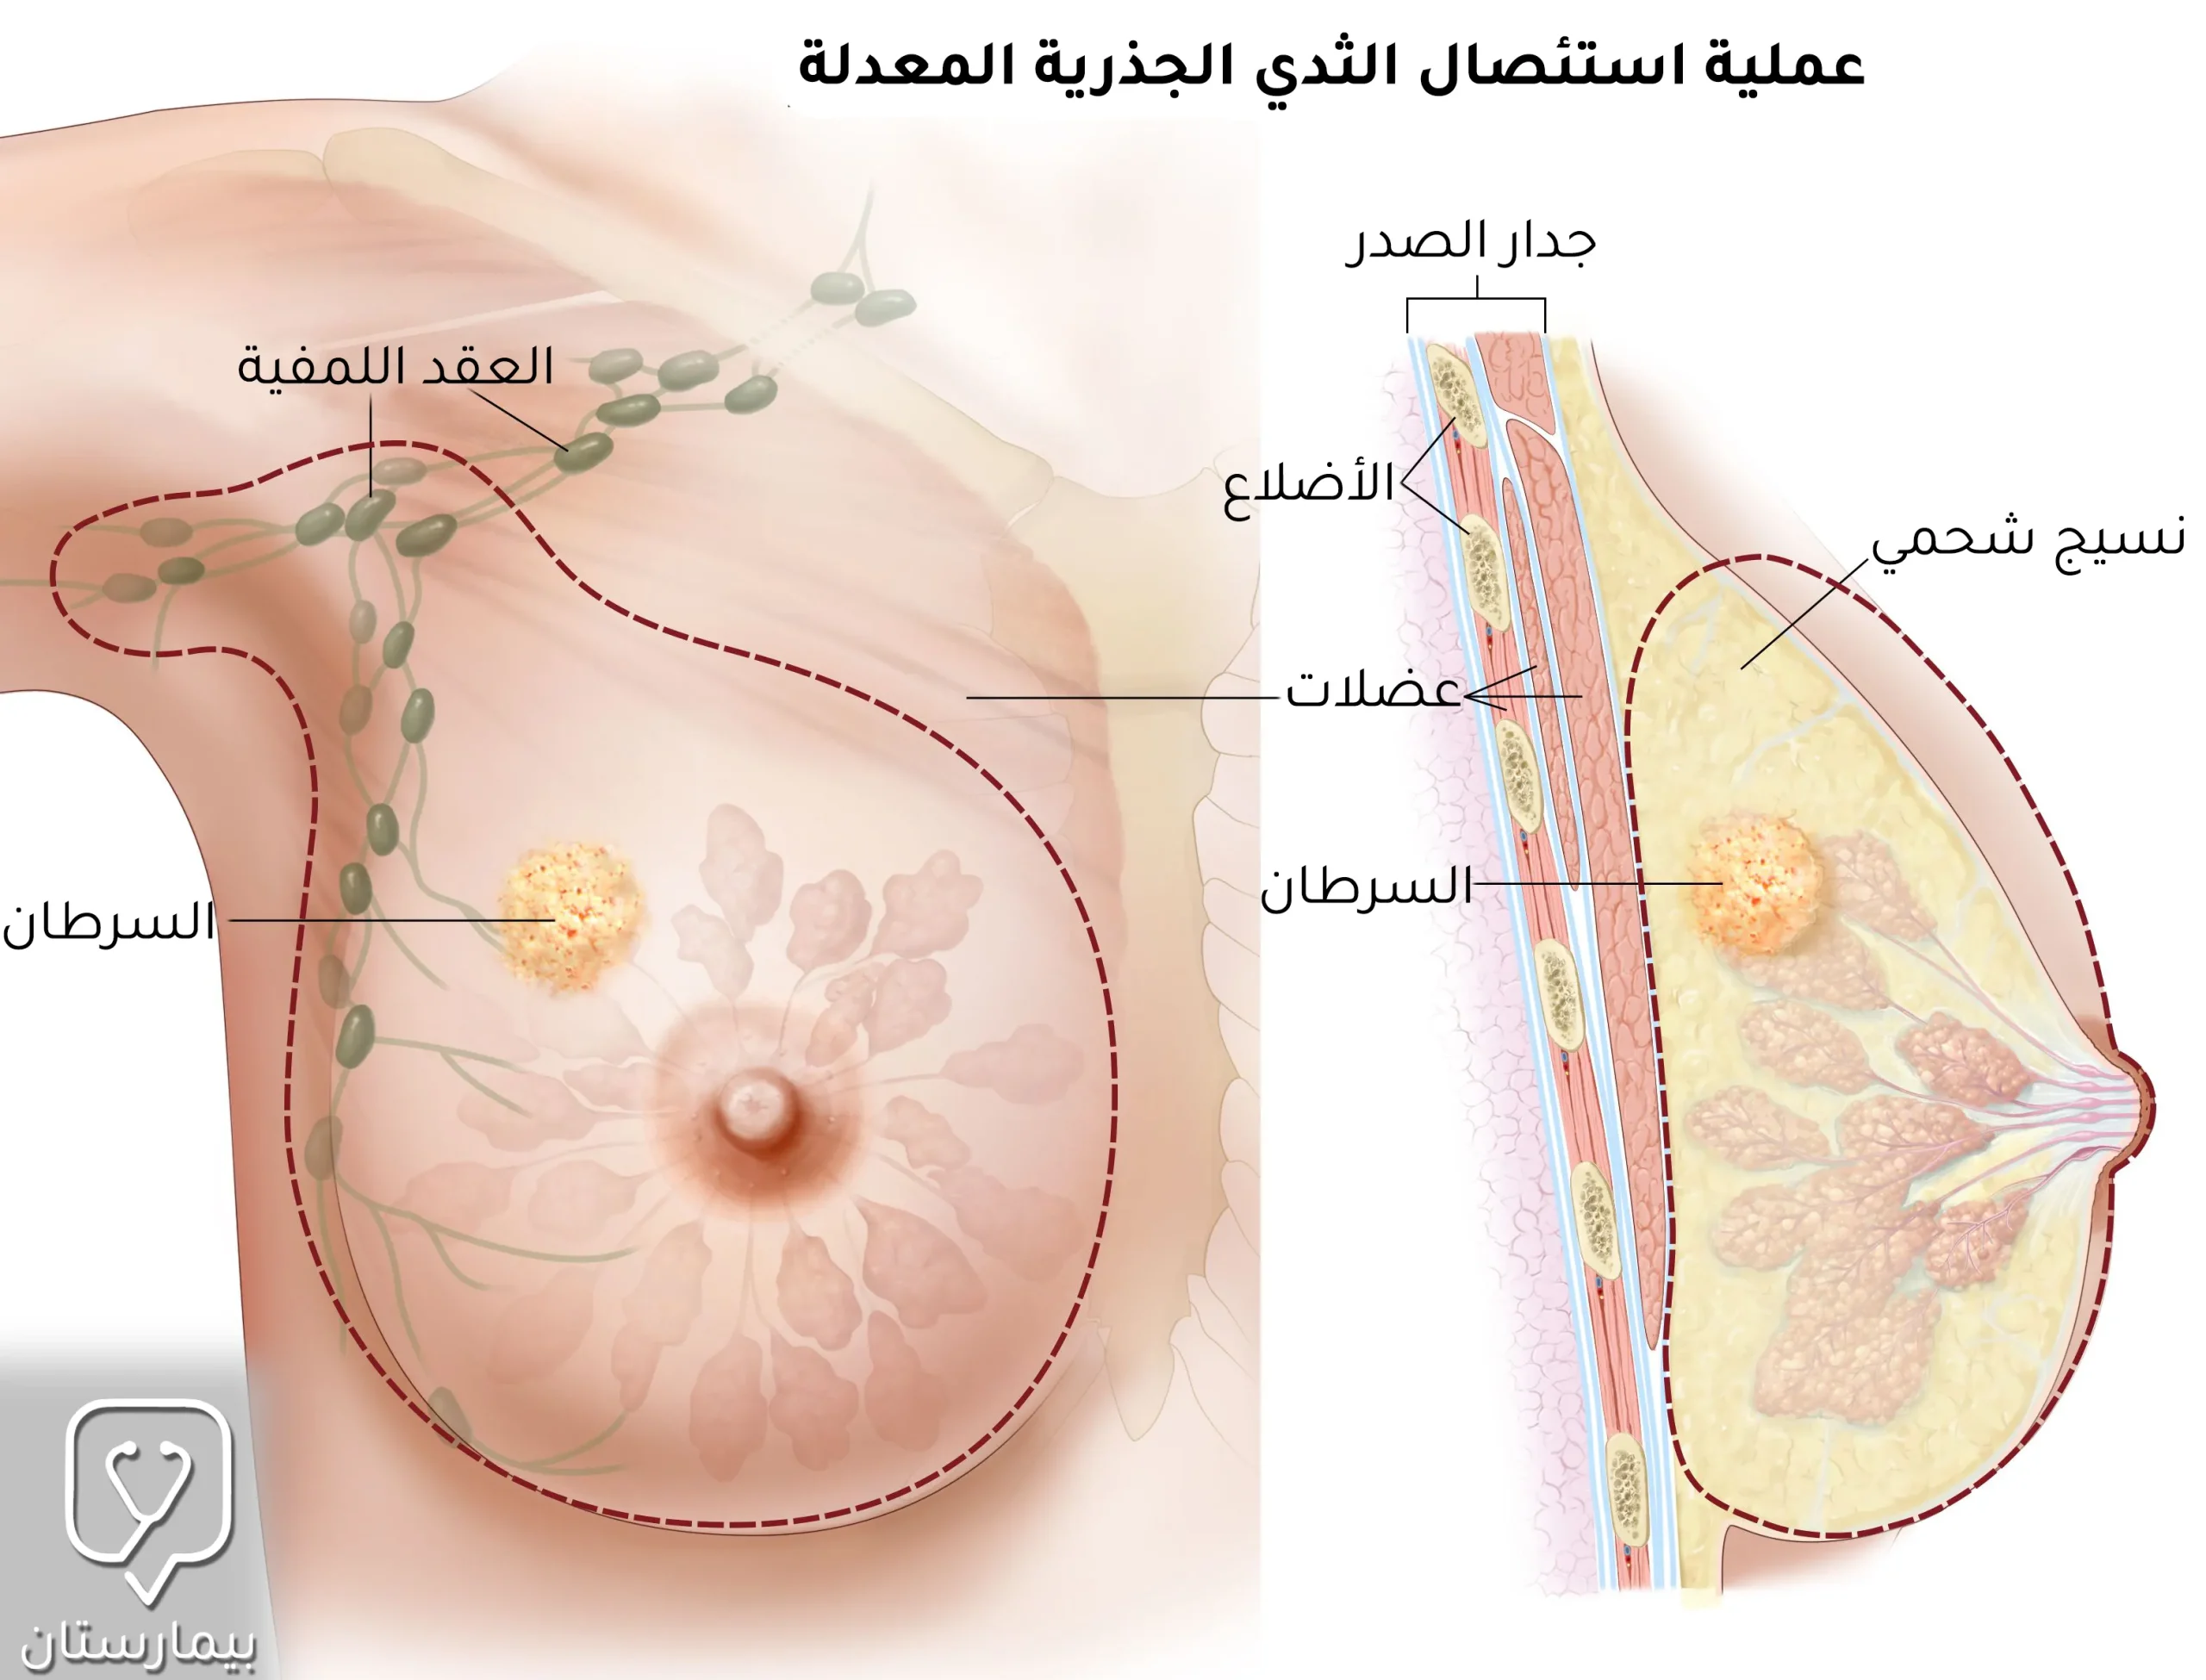 In a modified radical mastectomy, the entire breast tissue is removed along with the axillary phlegmatic nodes